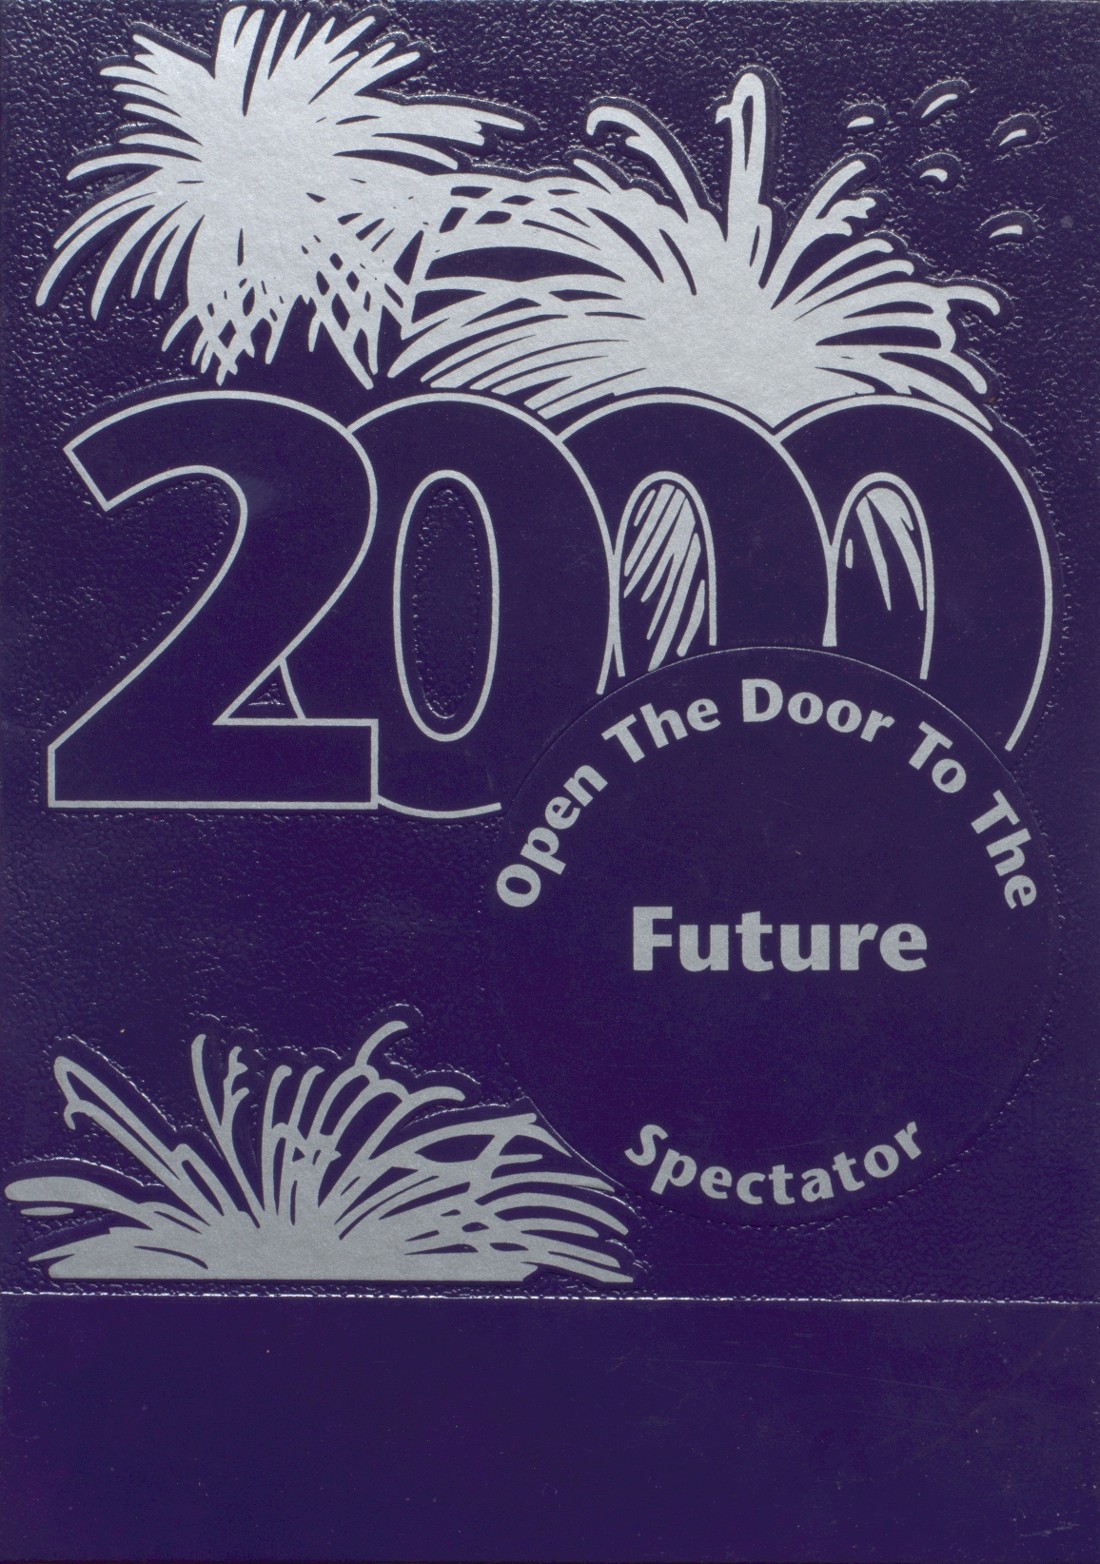 2000 yearbook from Darlington High School from Darlington, South